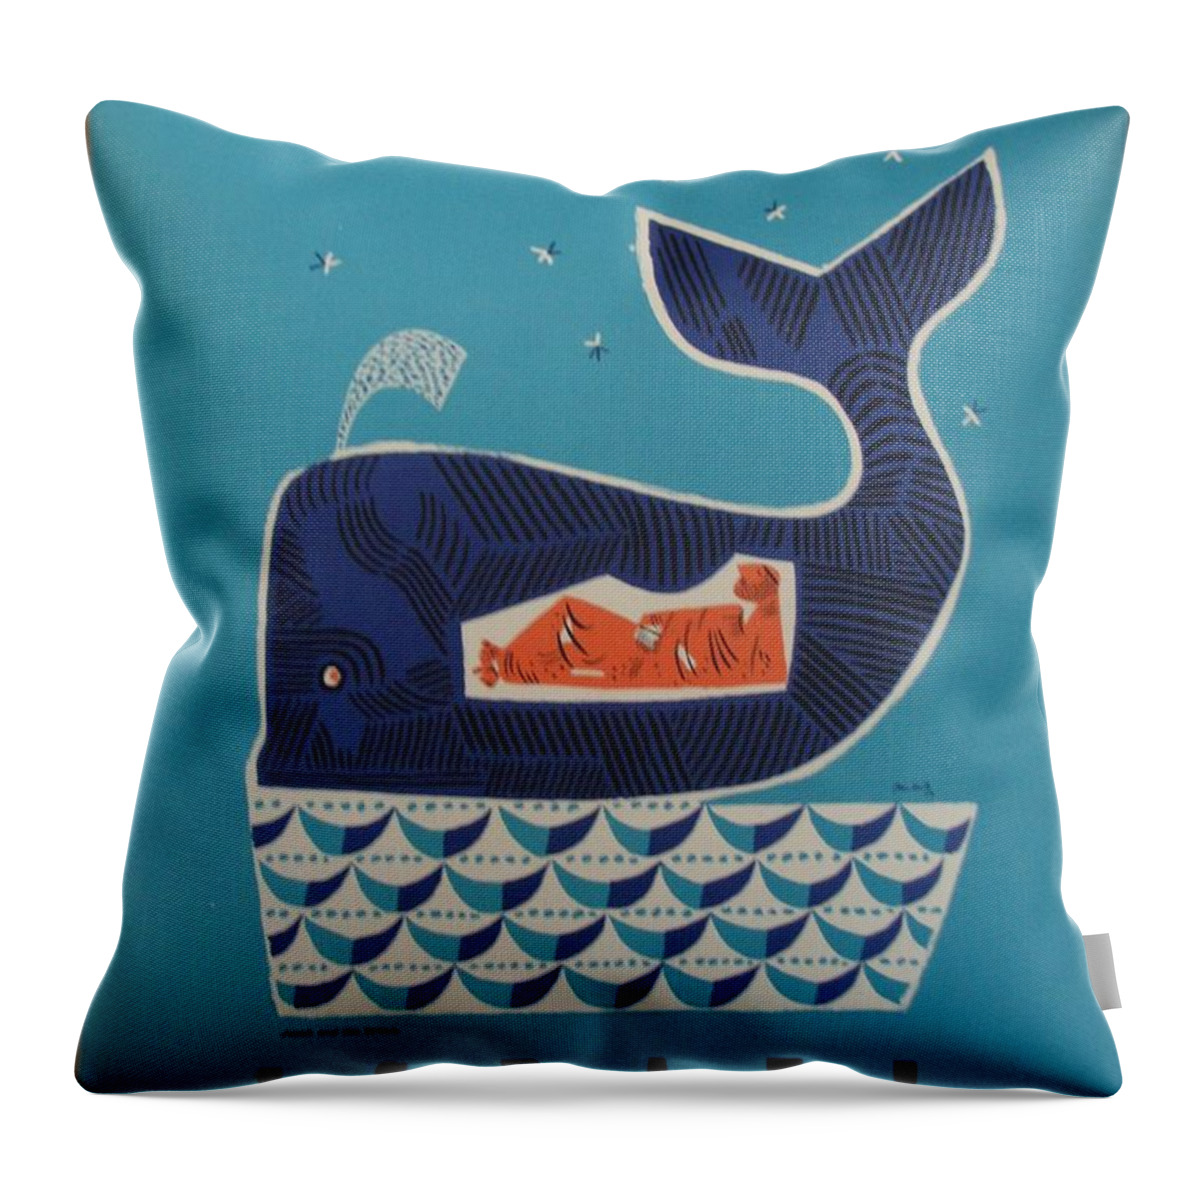 Jonah And The Whale Israel Travel Poster 1954 Throw Pillow featuring the painting Jonah And The Whale Israel Travel Poster 1954 by MotionAge Designs